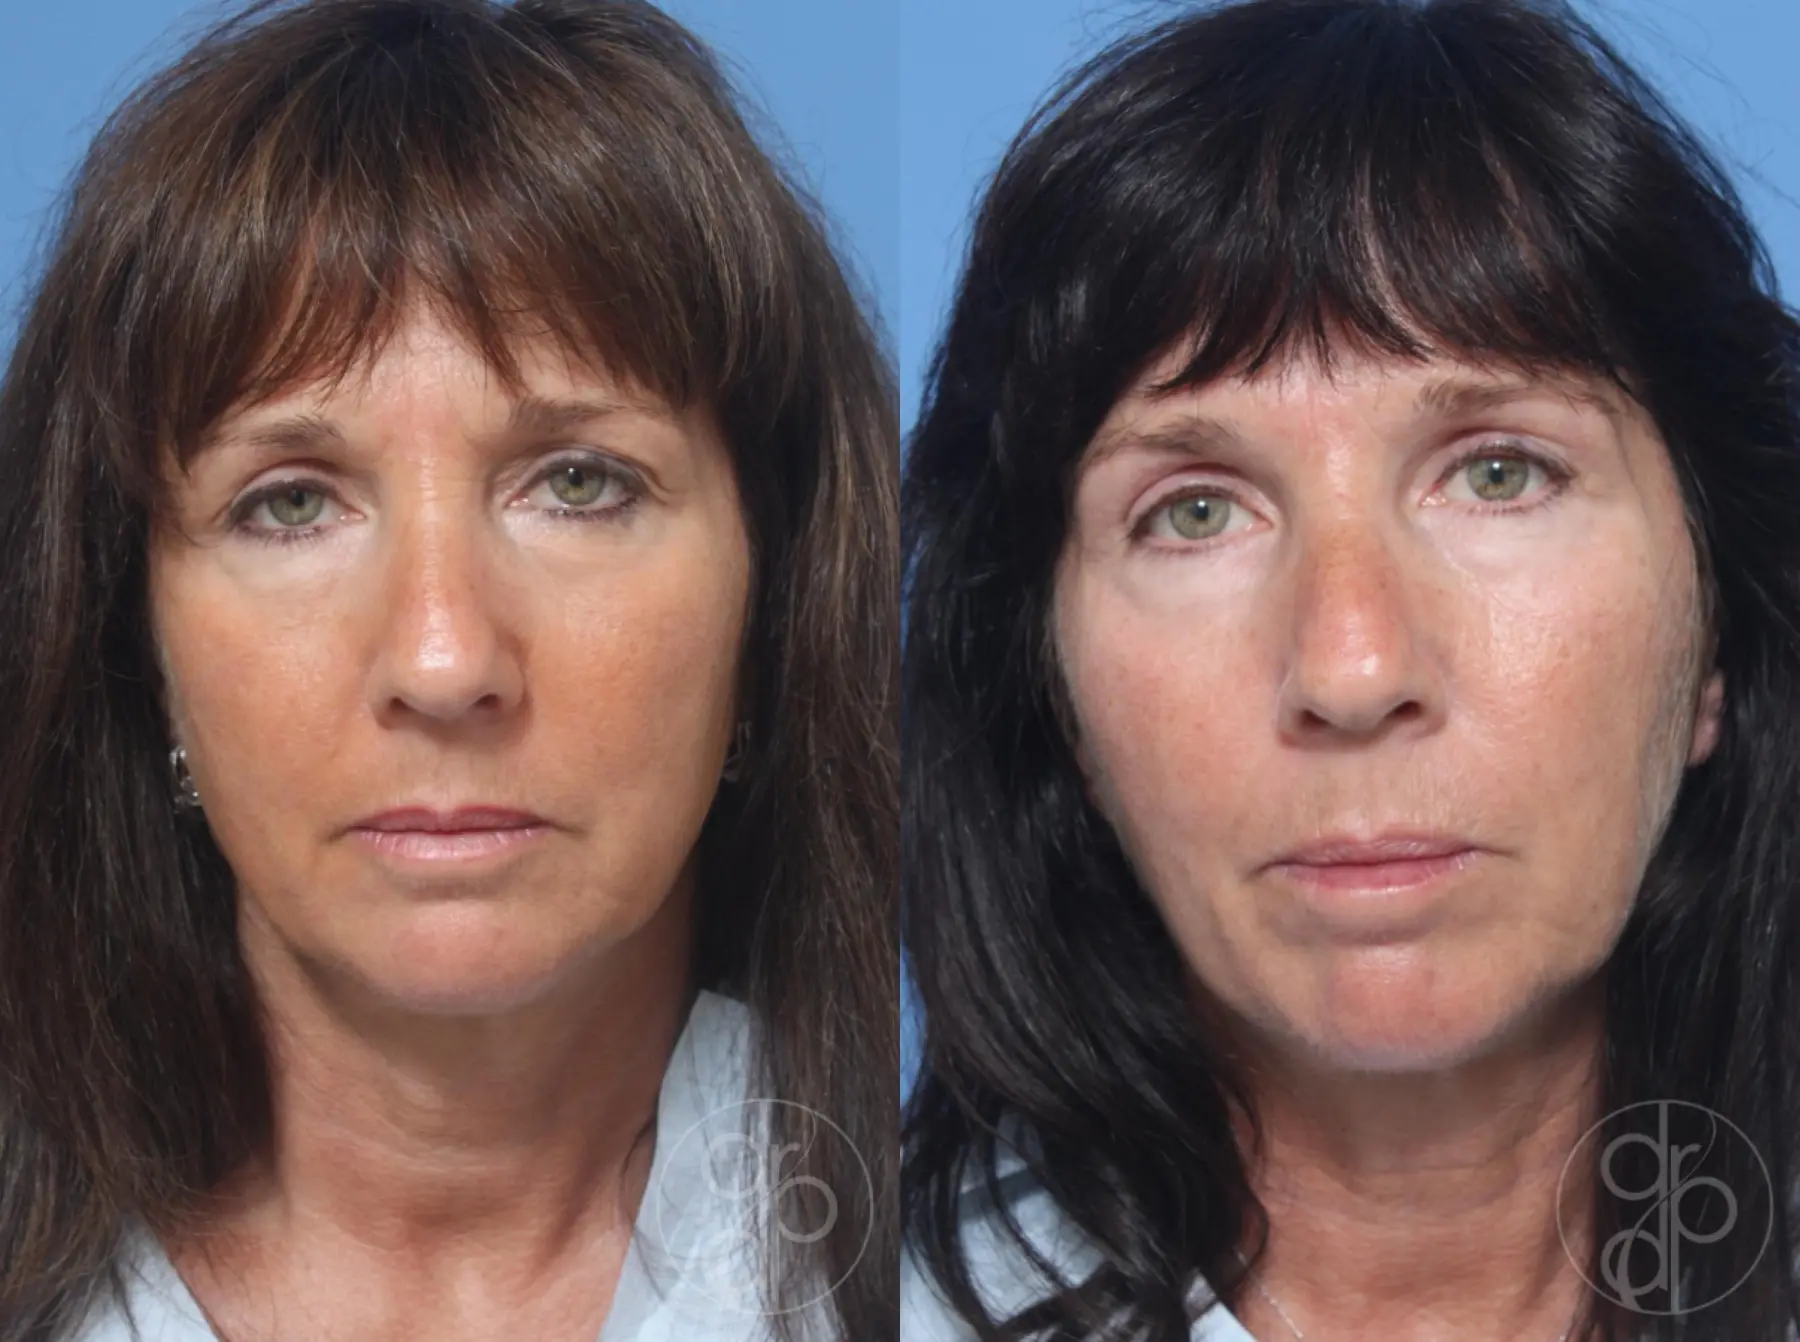 patient 11904 blepharoplasty before and after result - Before and After